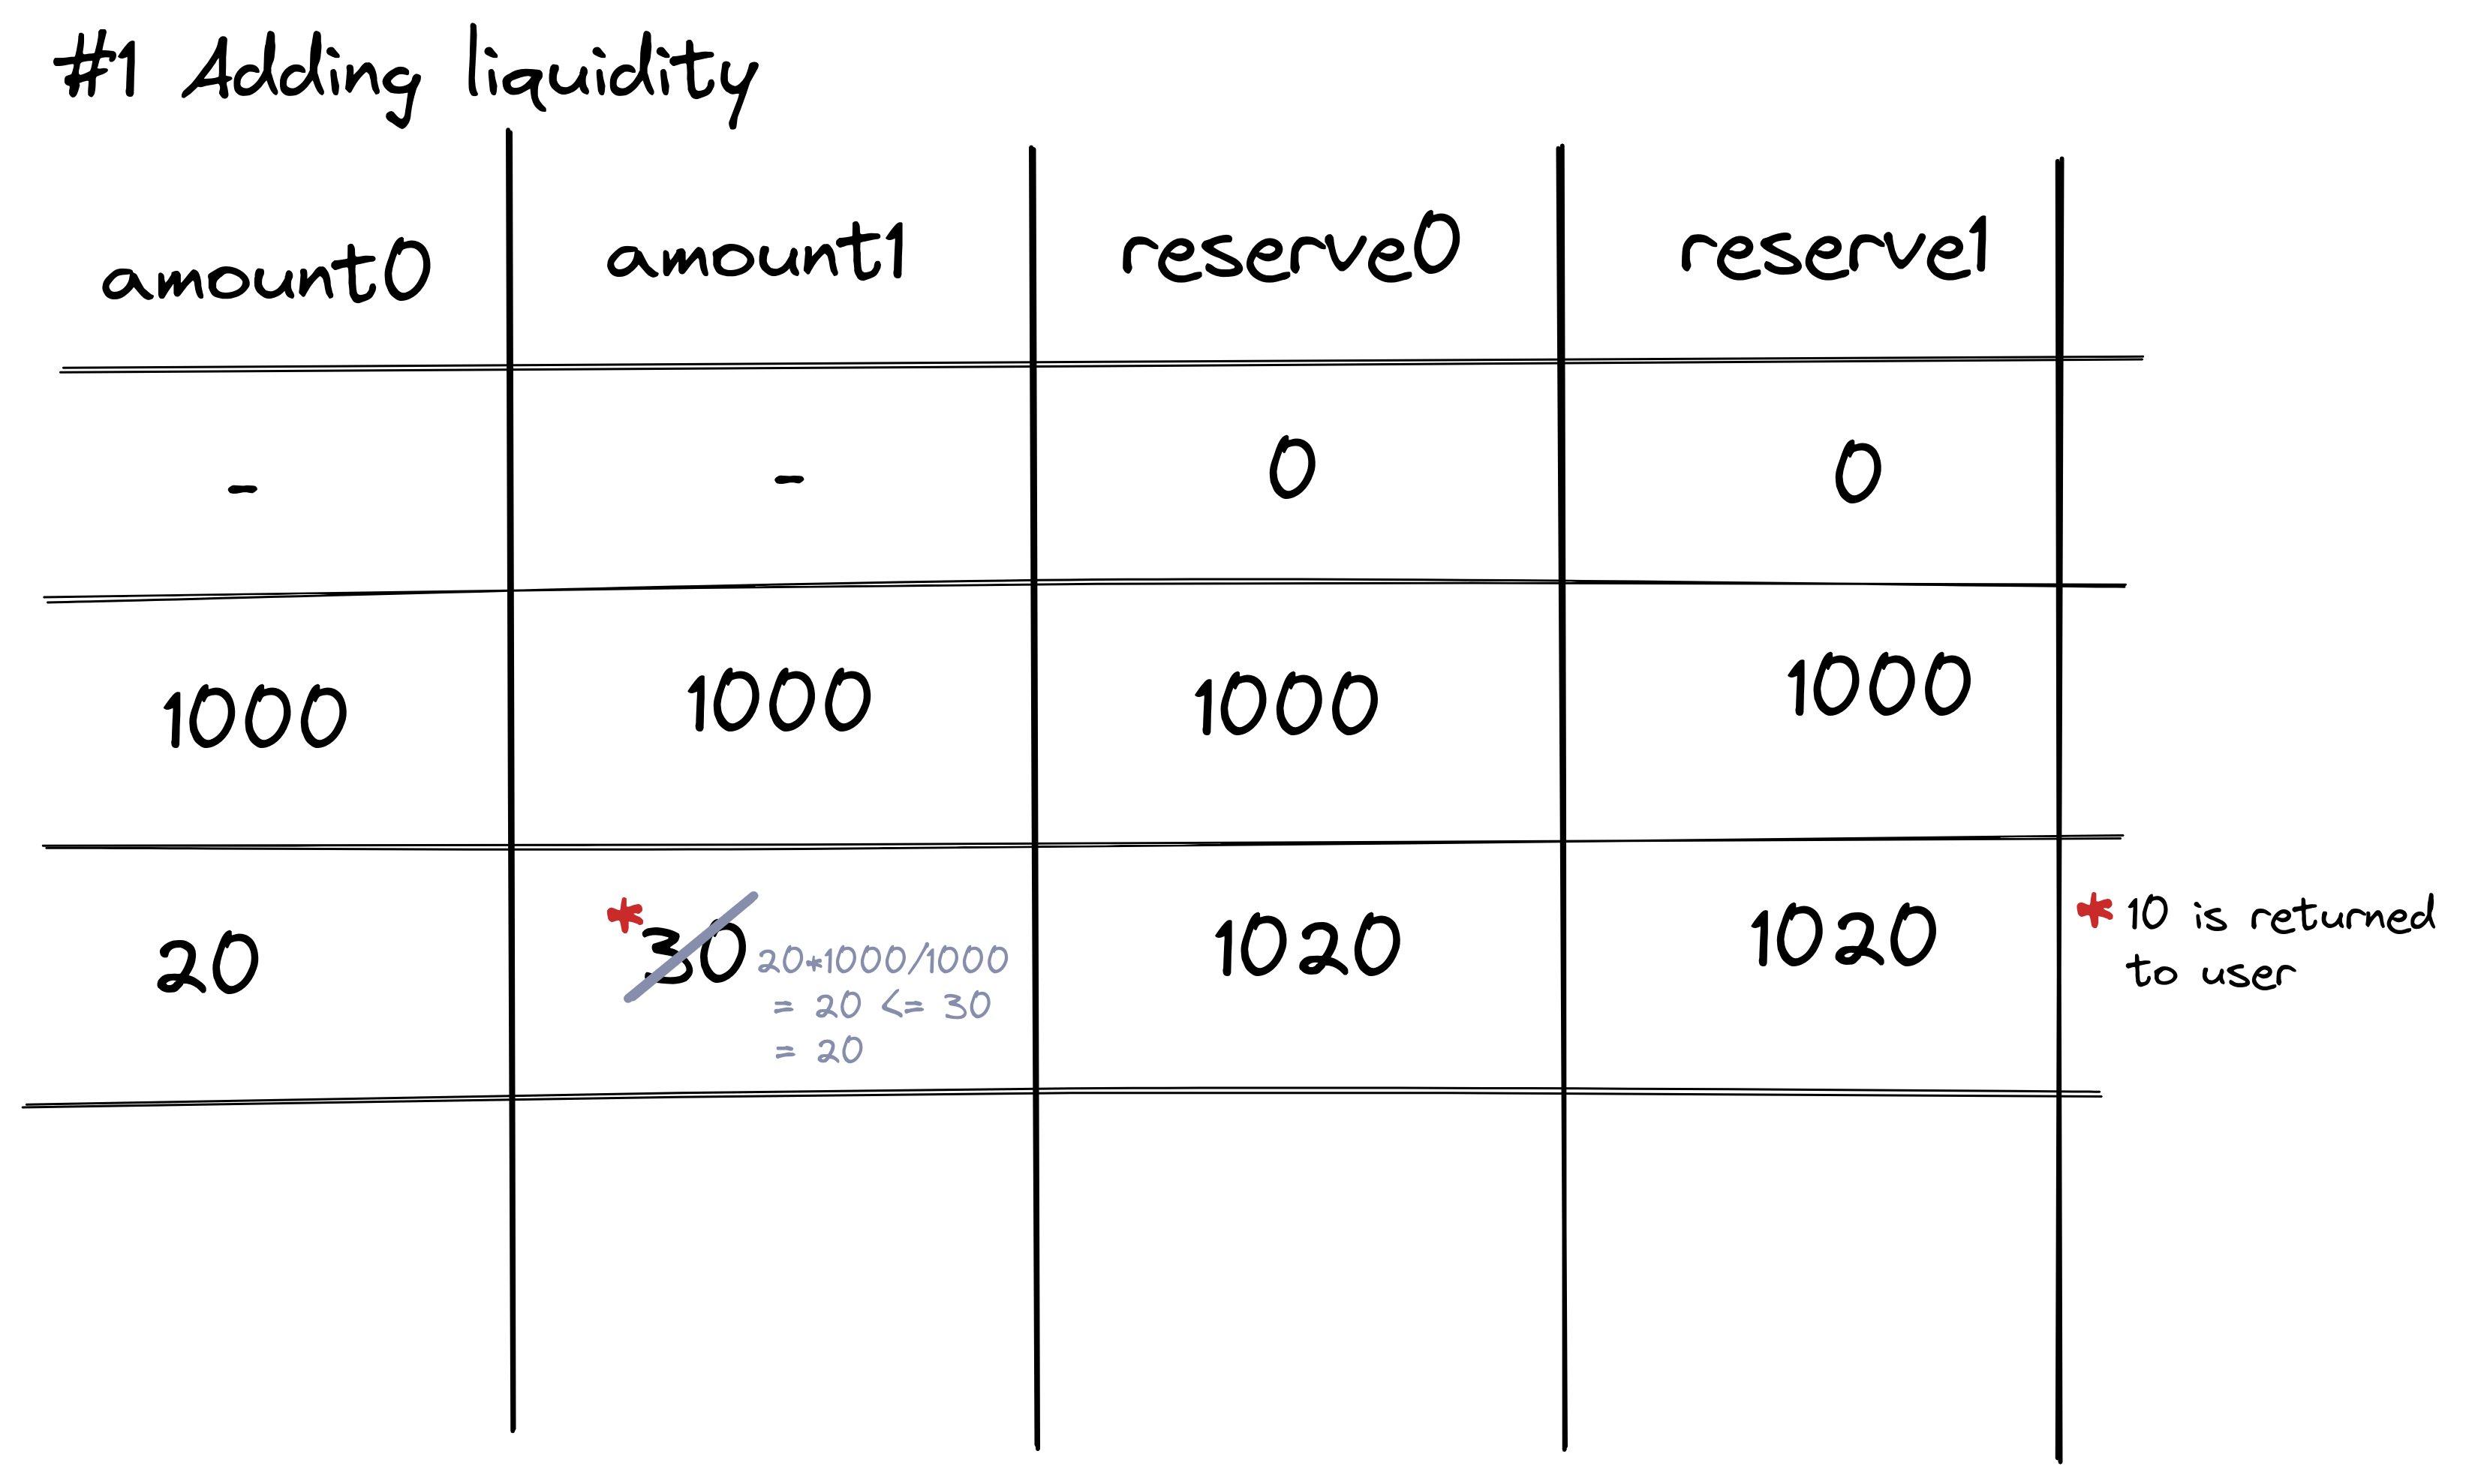 Table with amount0, amount1, reserve0, reserve1